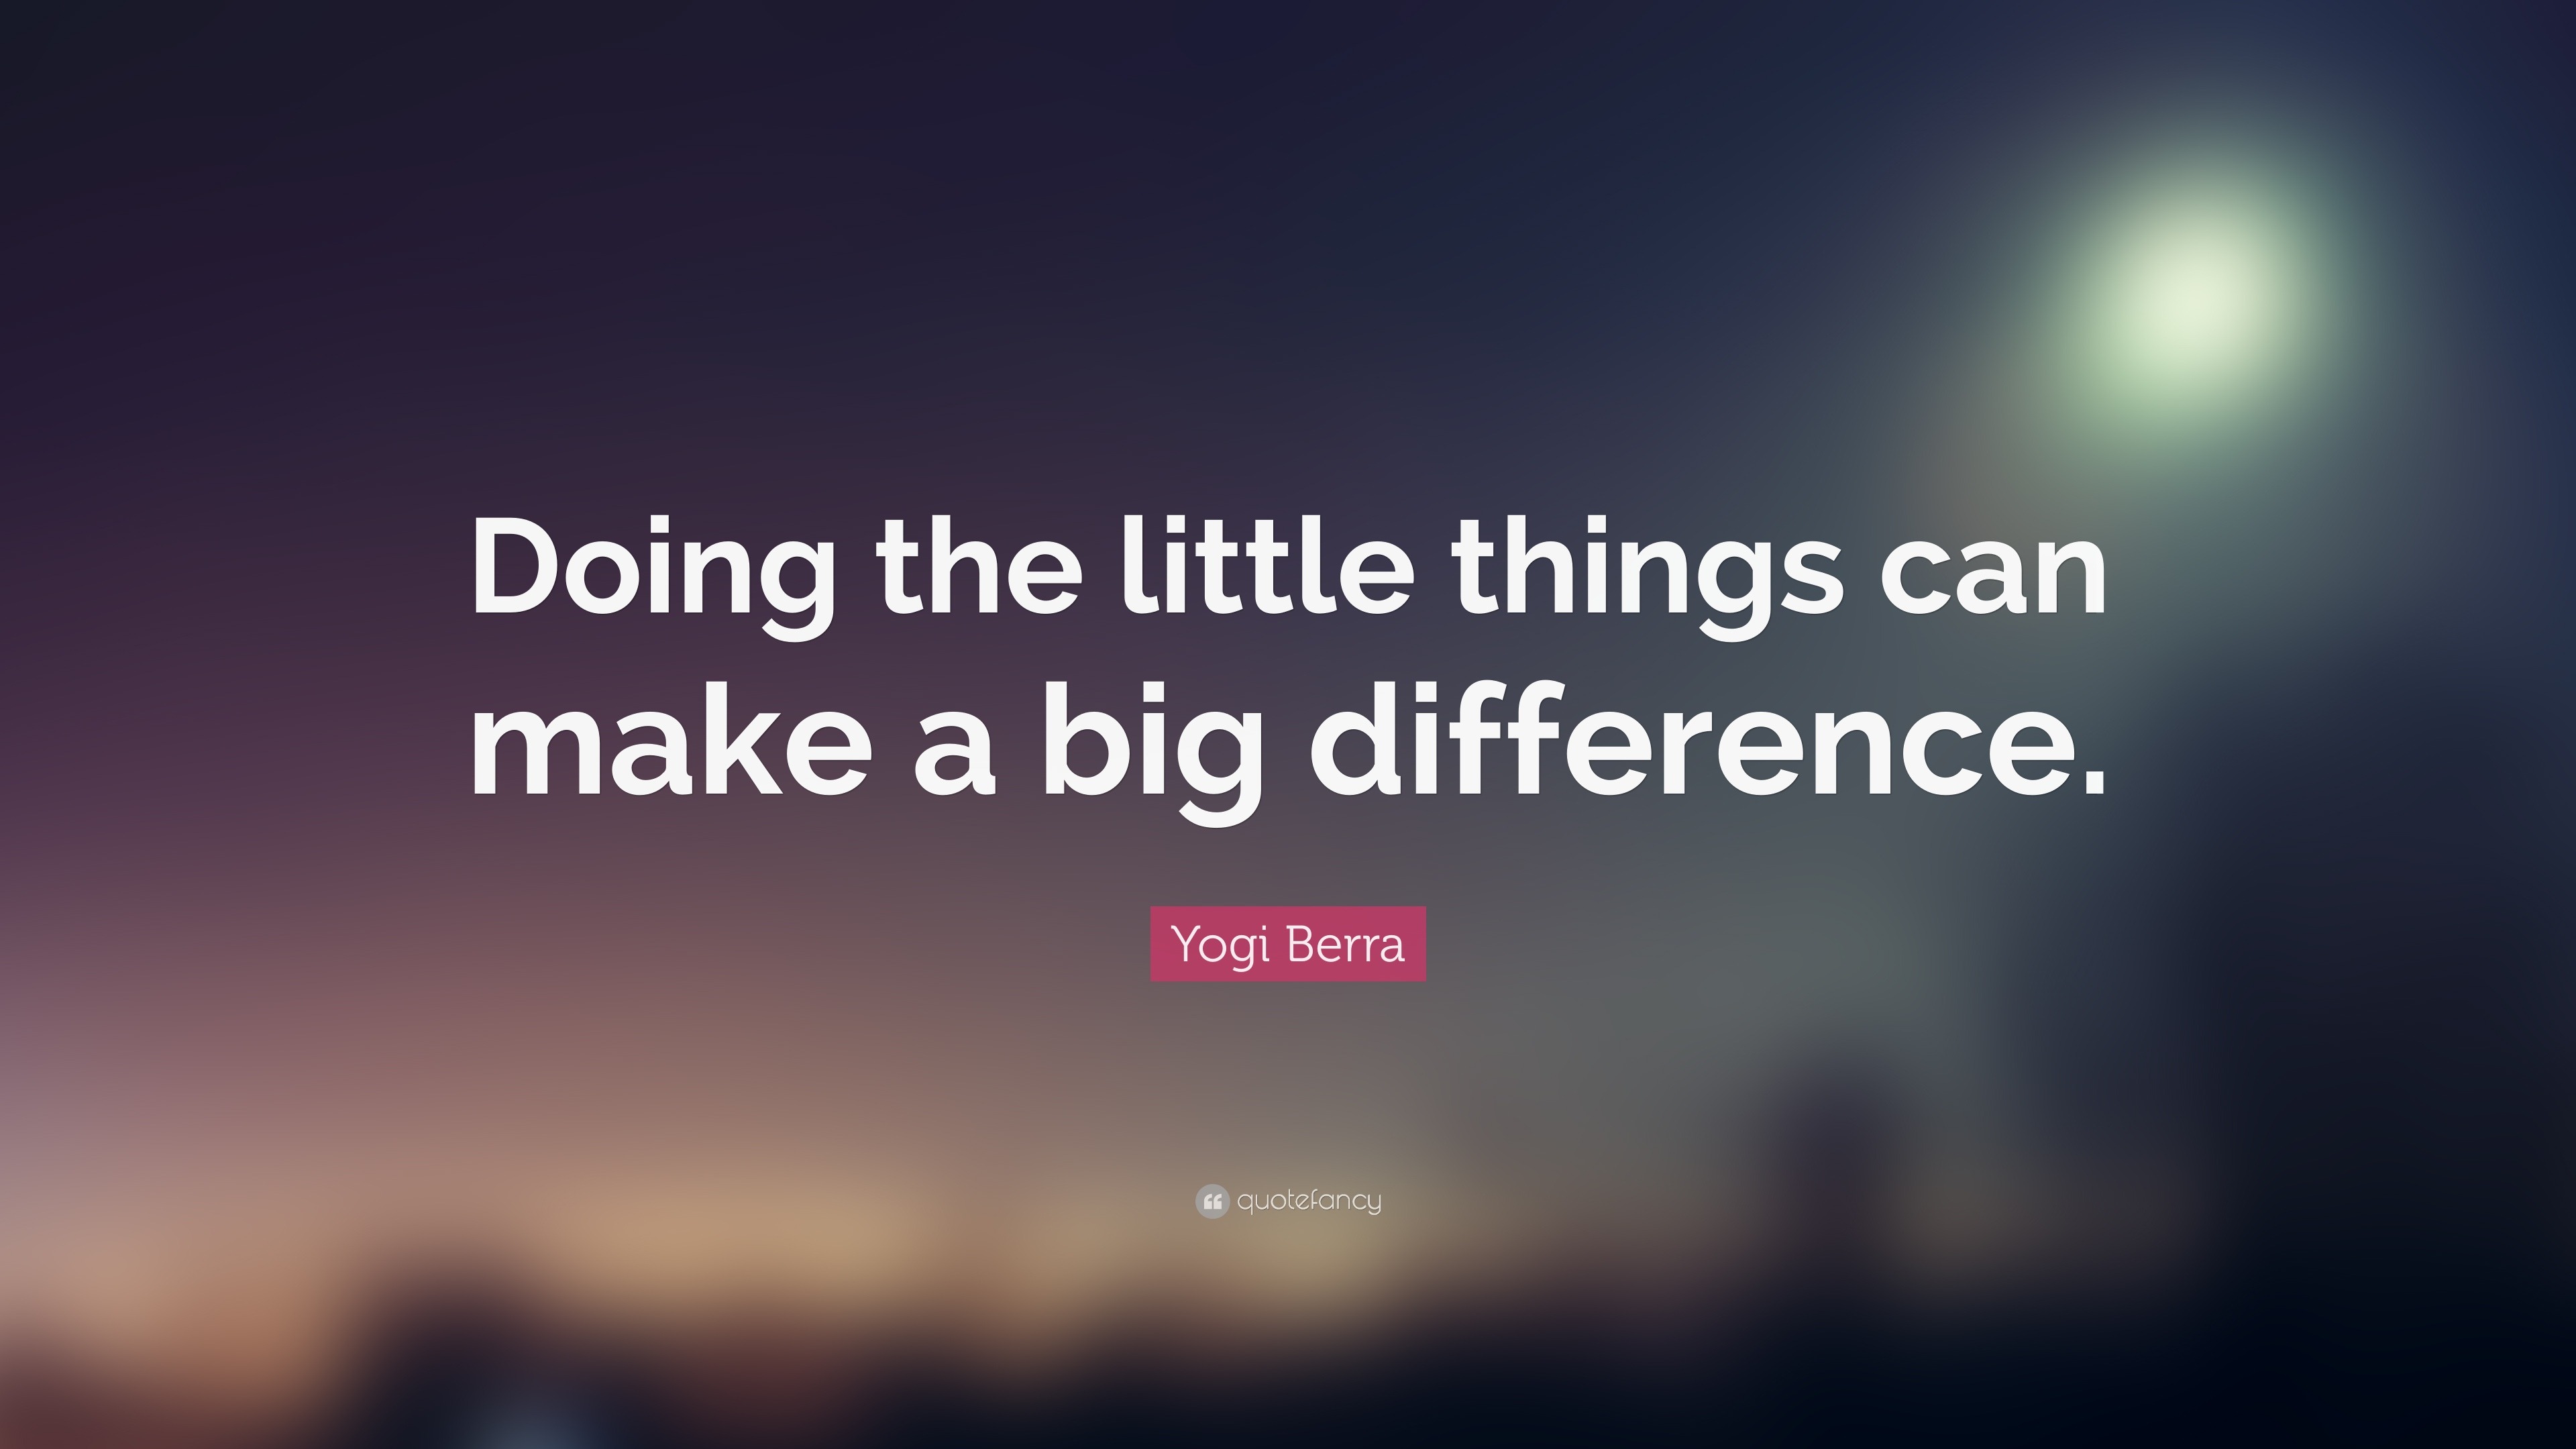 Yogi Berra Quote: “Doing the little things can make a big difference.”